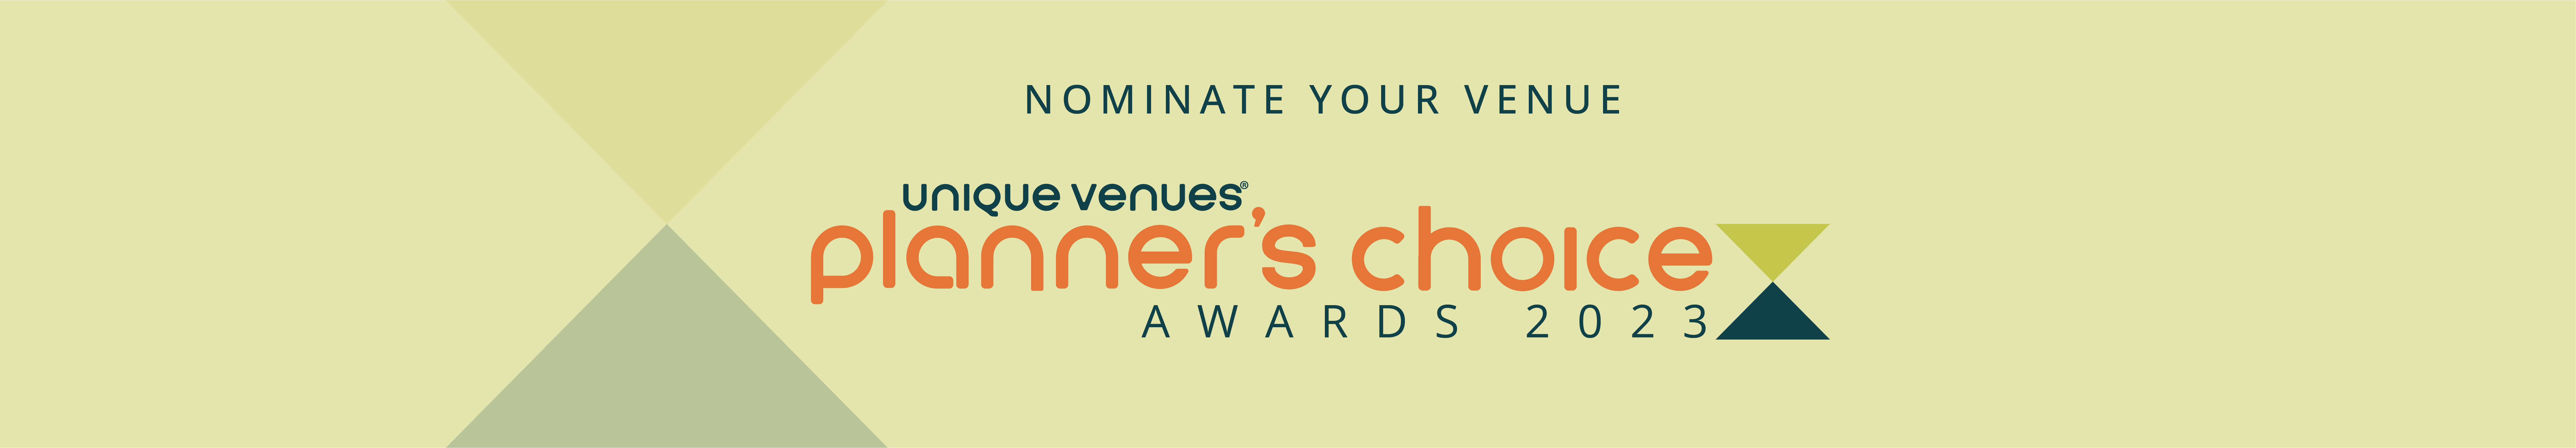 Nominate your venue - planner's choice banner